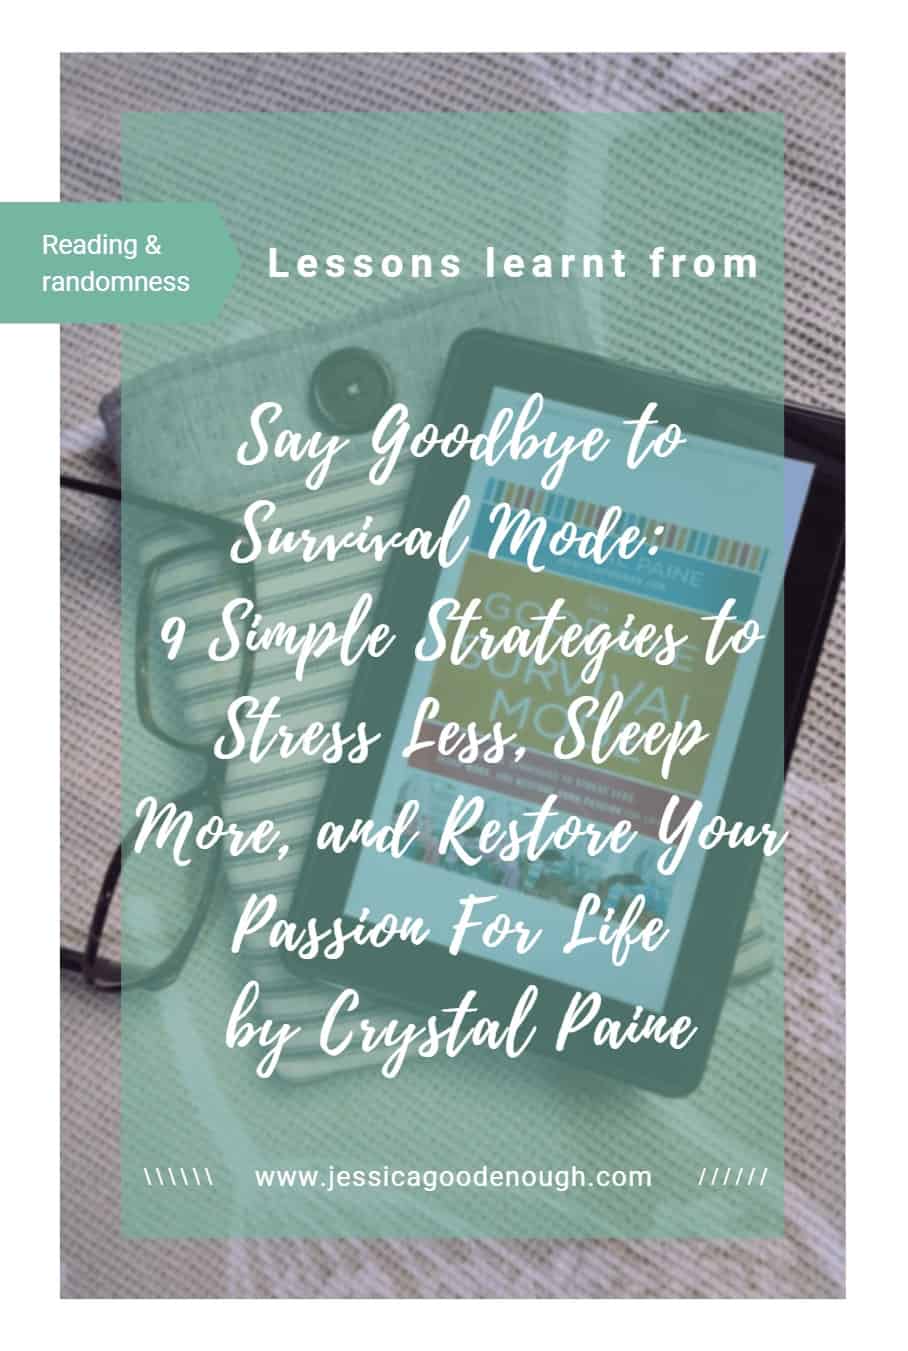 Pin this: lessons learnt from Say Goodbye to Survival Mode by Crystal Paine